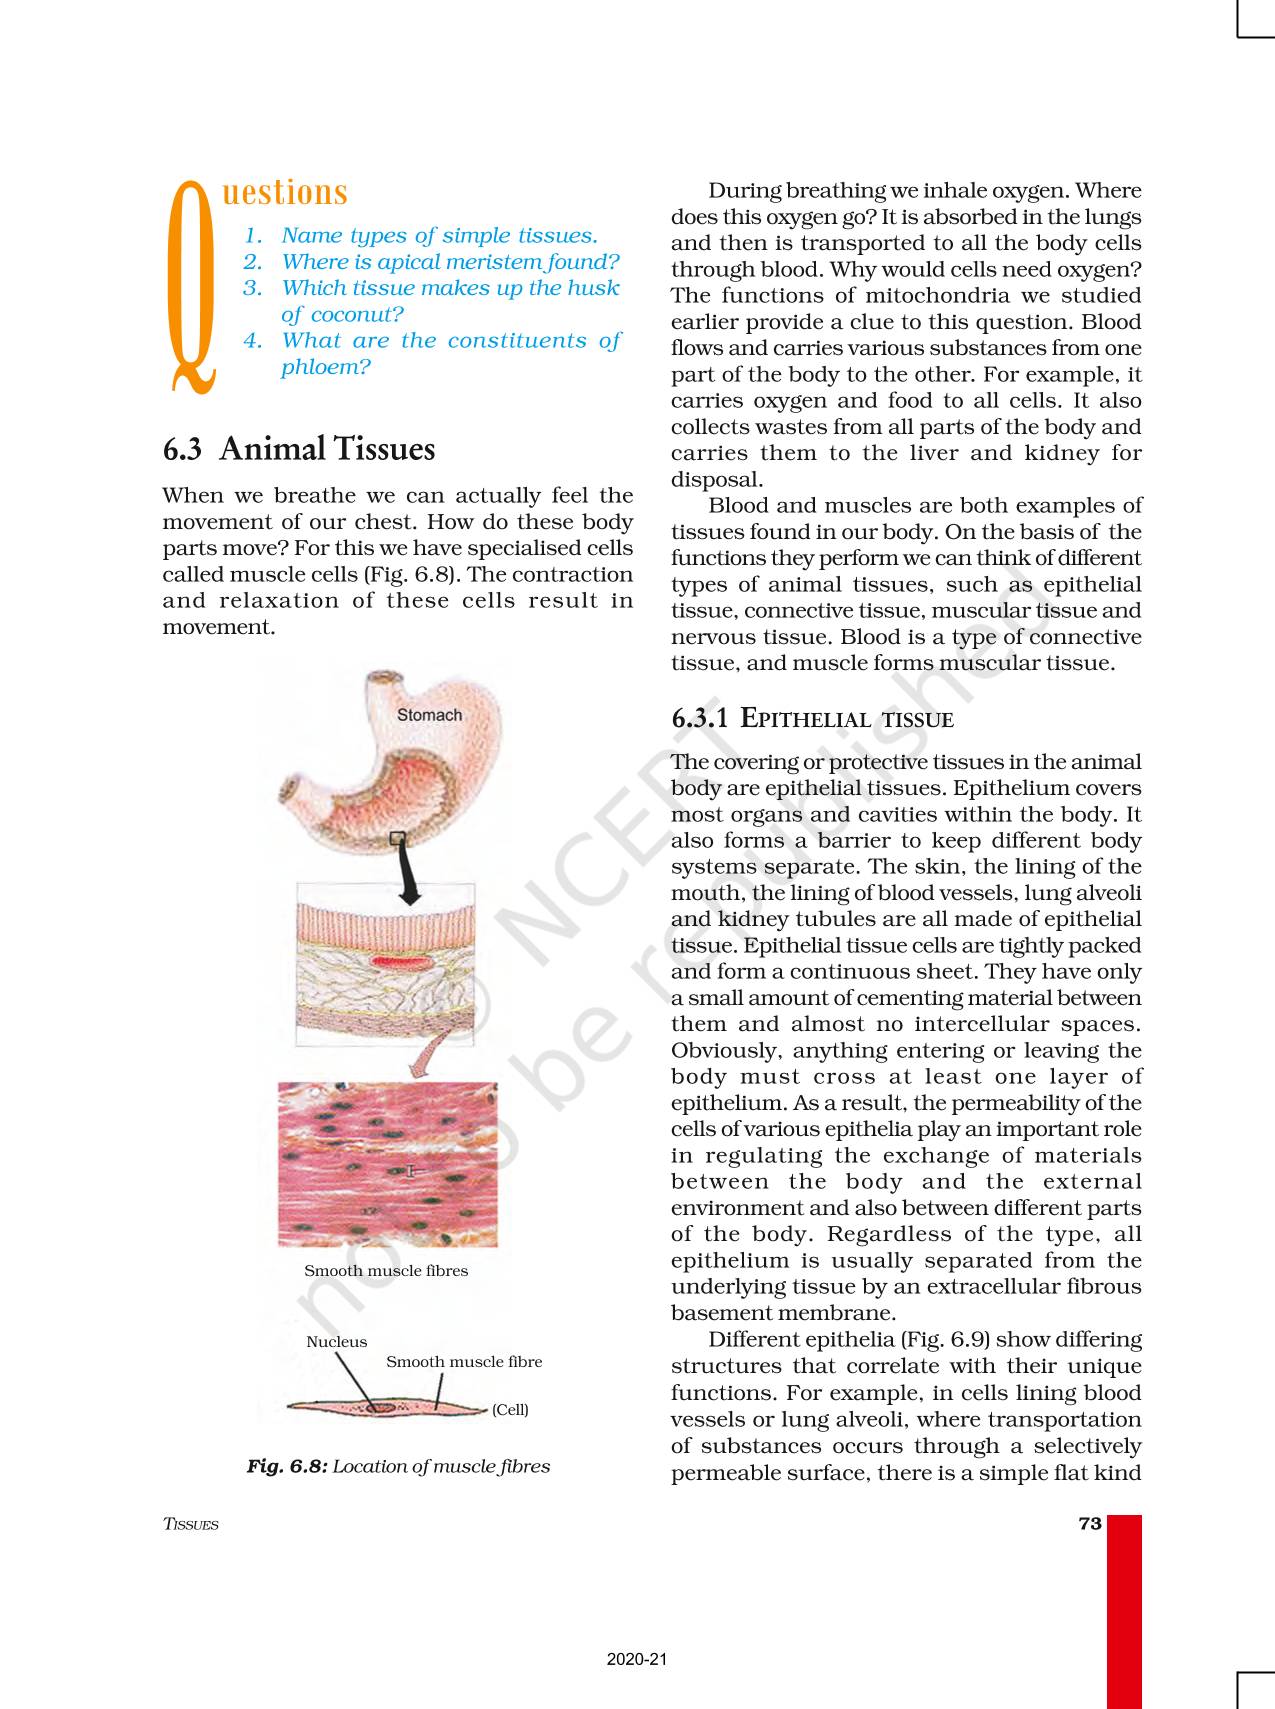 Tissues - NCERT Book of Class 9 Science